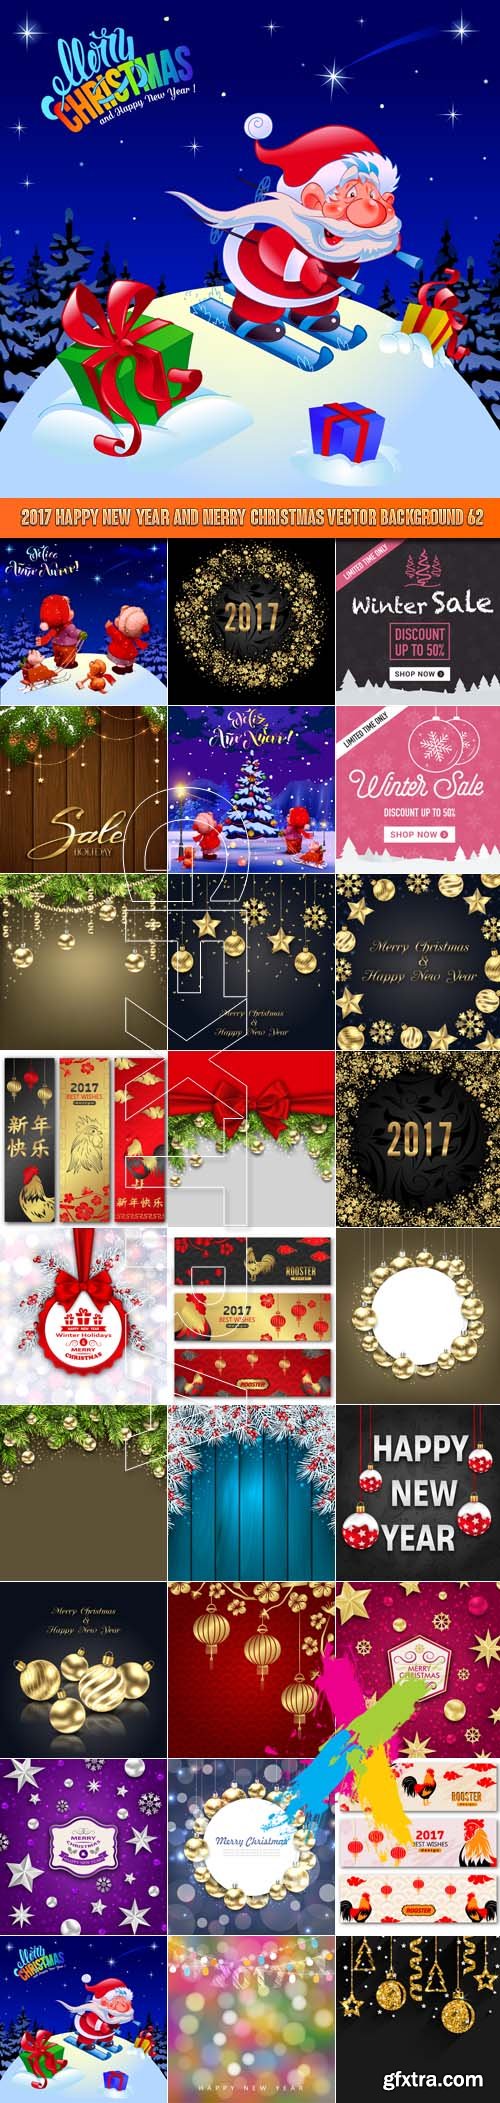 2017 Happy New Year and Merry Christmas vector background 62